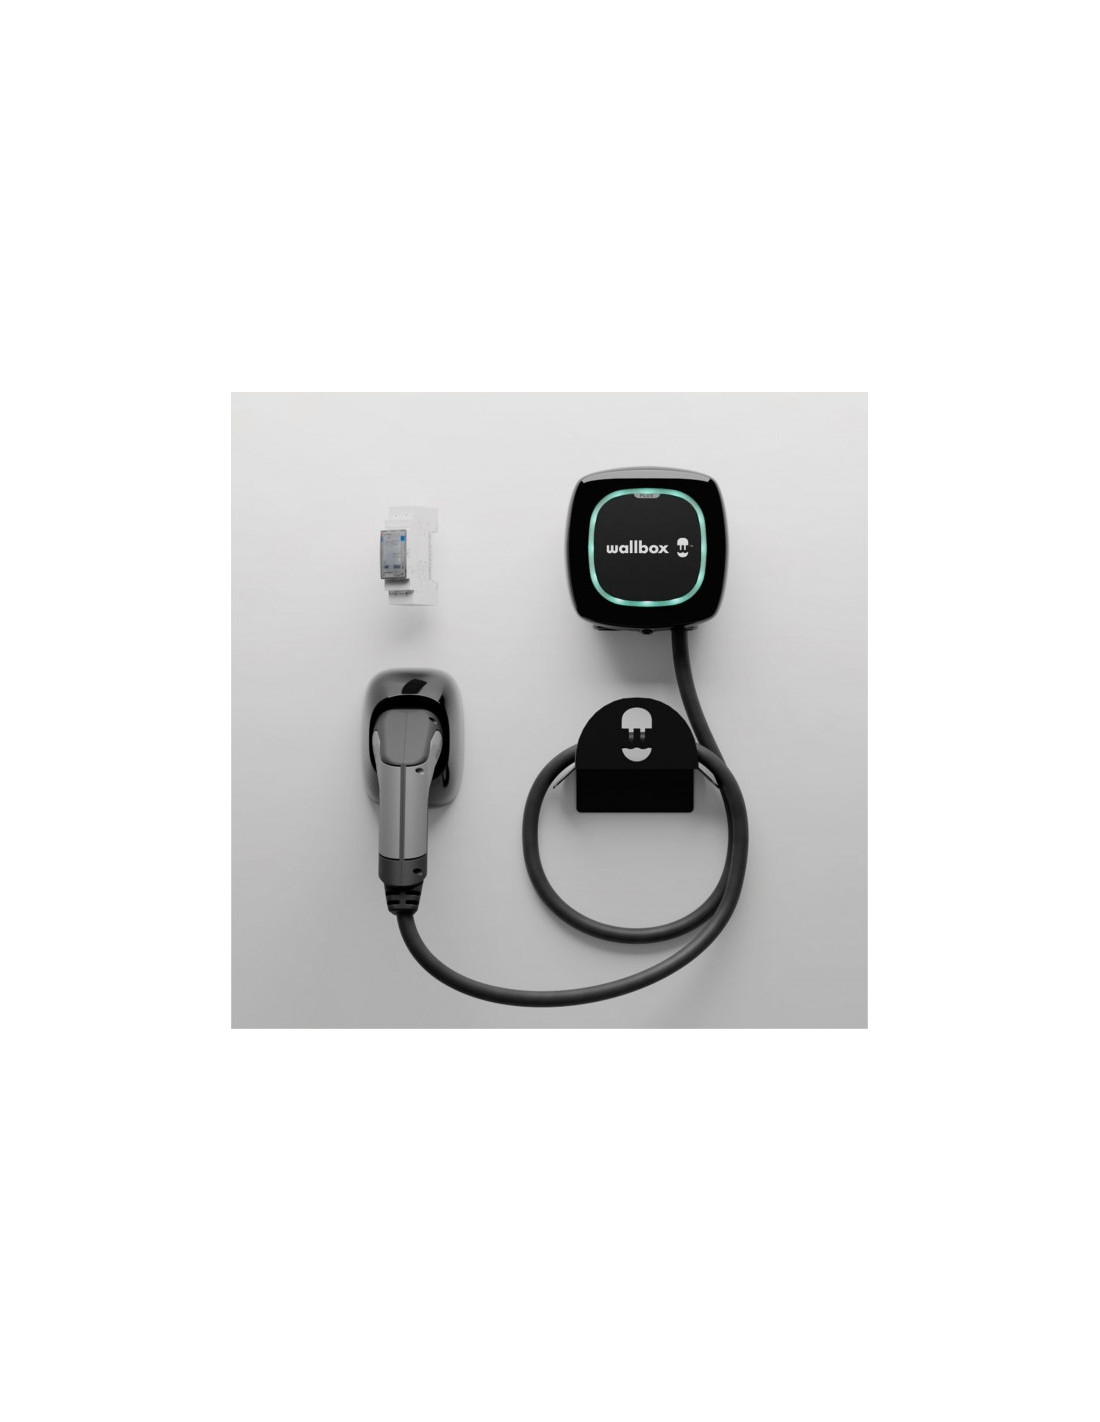 holder type 2, + + Pulsar Power EV 22kW 5m, Cable Plus Kit Wallbox charger, Powerboost